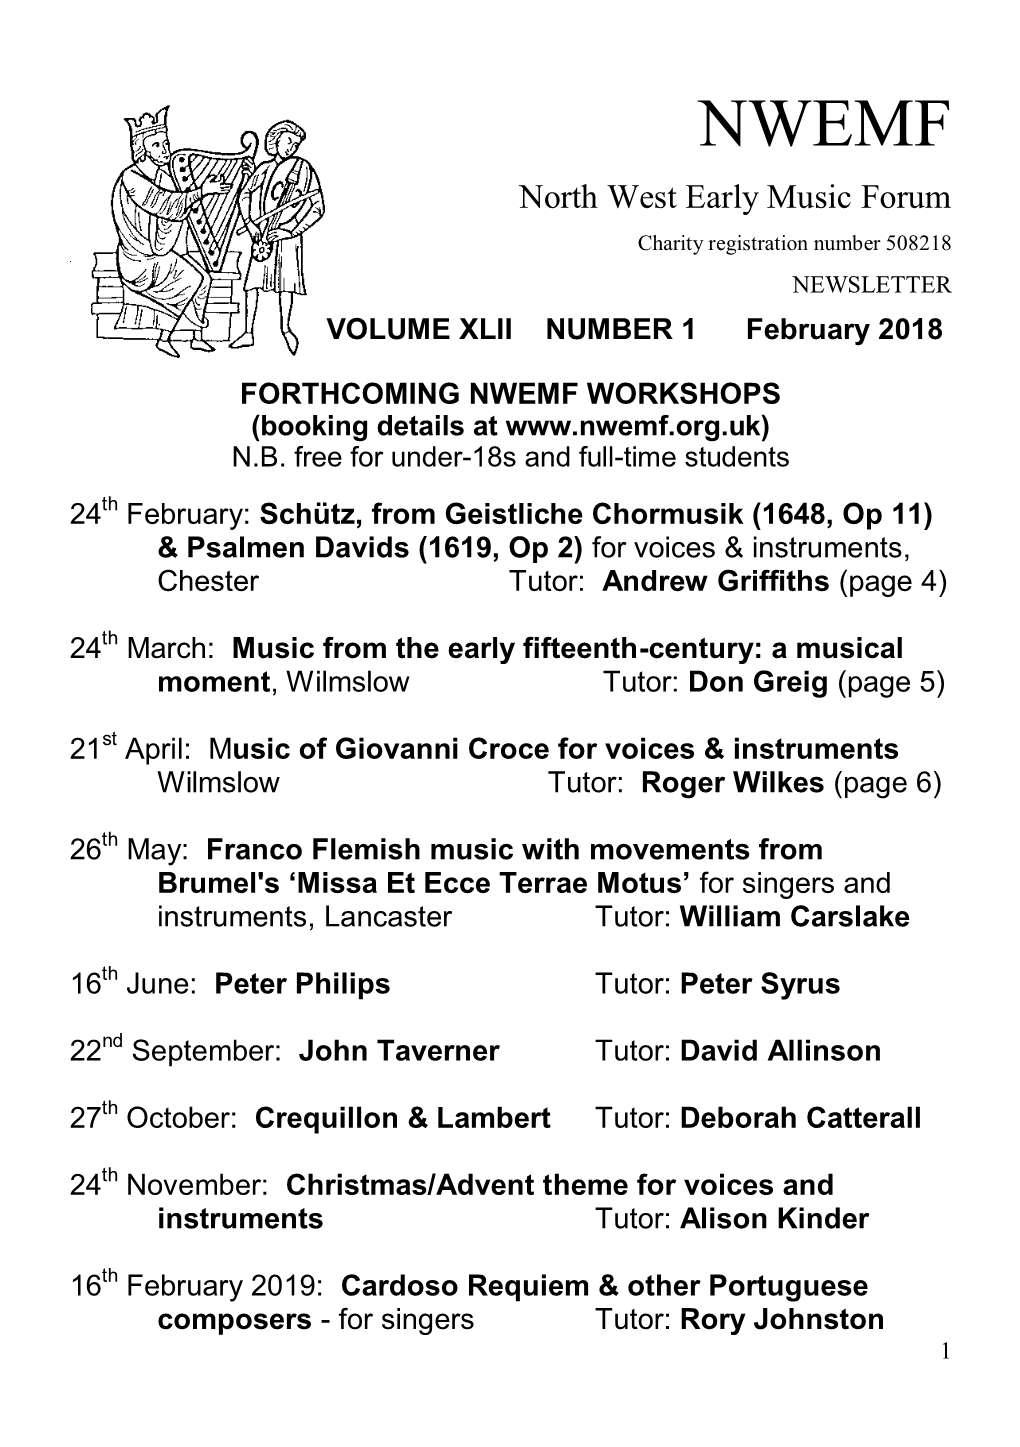 North West Early Music Forum Charity Registration Number 508218 NEWSLETTER VOLUME XLII NUMBER 1 February 2018